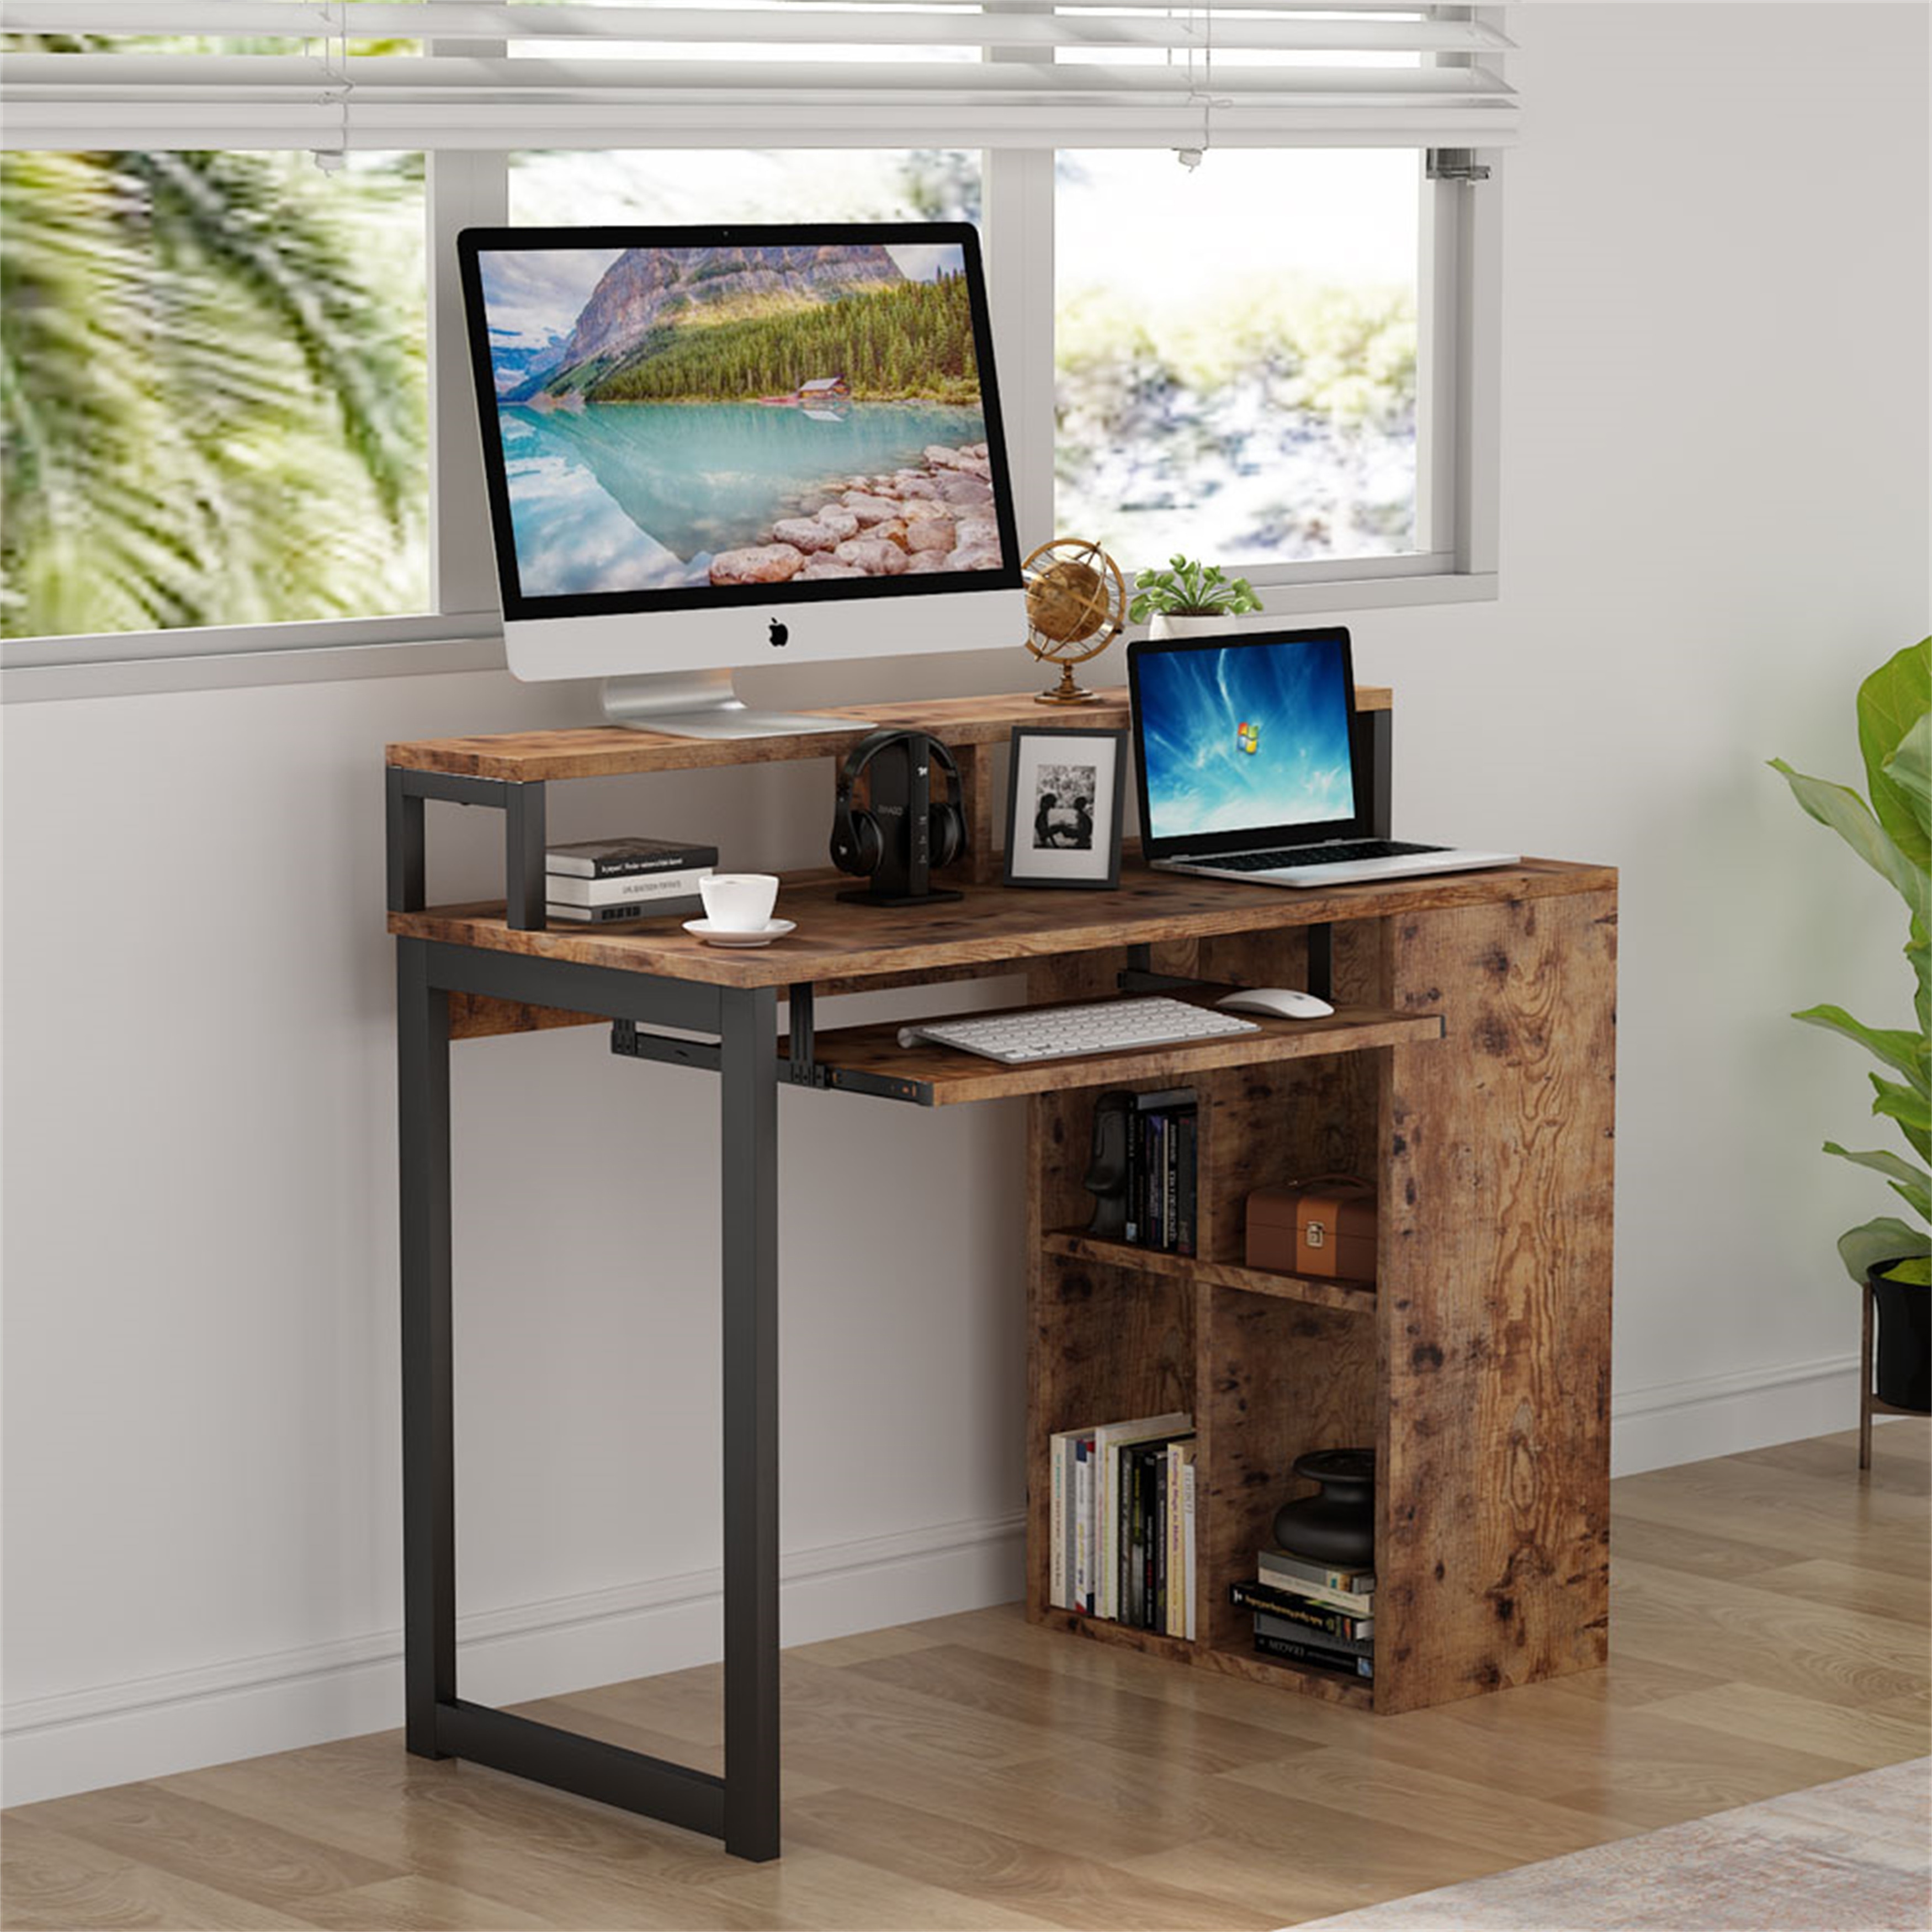 Industrial Computer Desk with 4-Cube Shelves & Push-Pull Keyboard TrayMaple